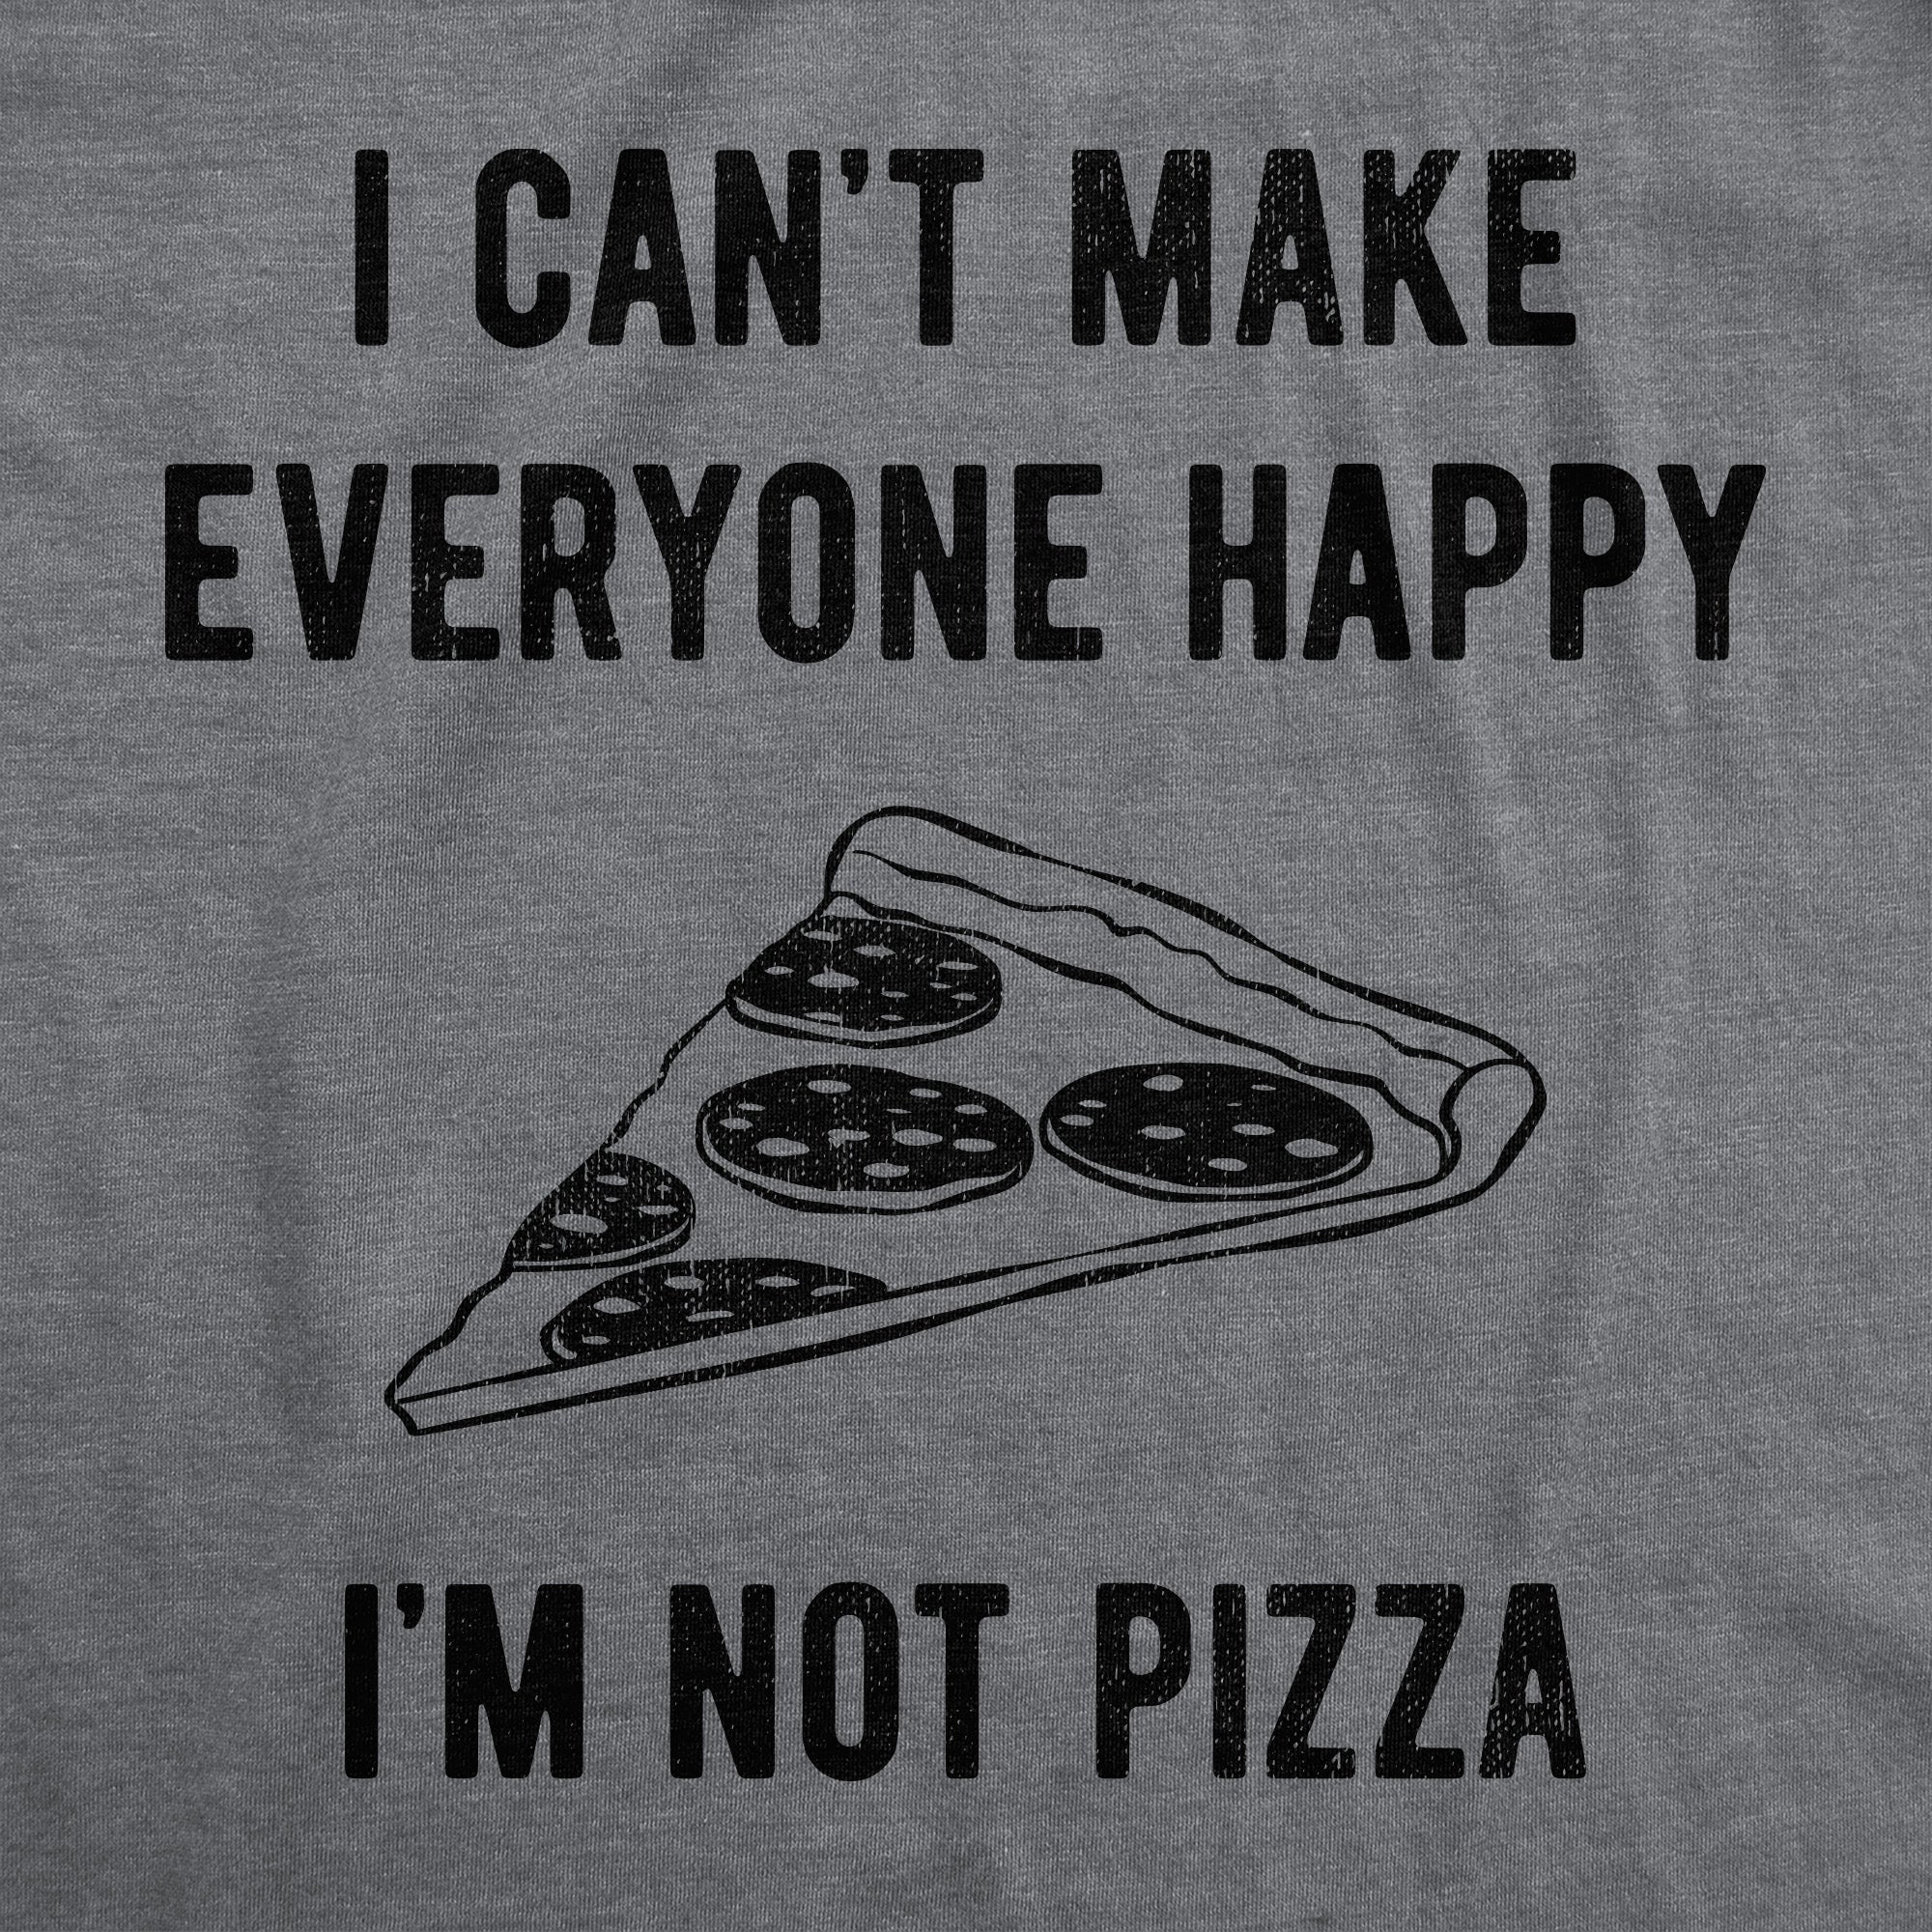 Funny Dark Heather Grey - PIZZA I Cant Make Everyone Happy Im Not Pizza Mens T Shirt Nerdy Food Tee